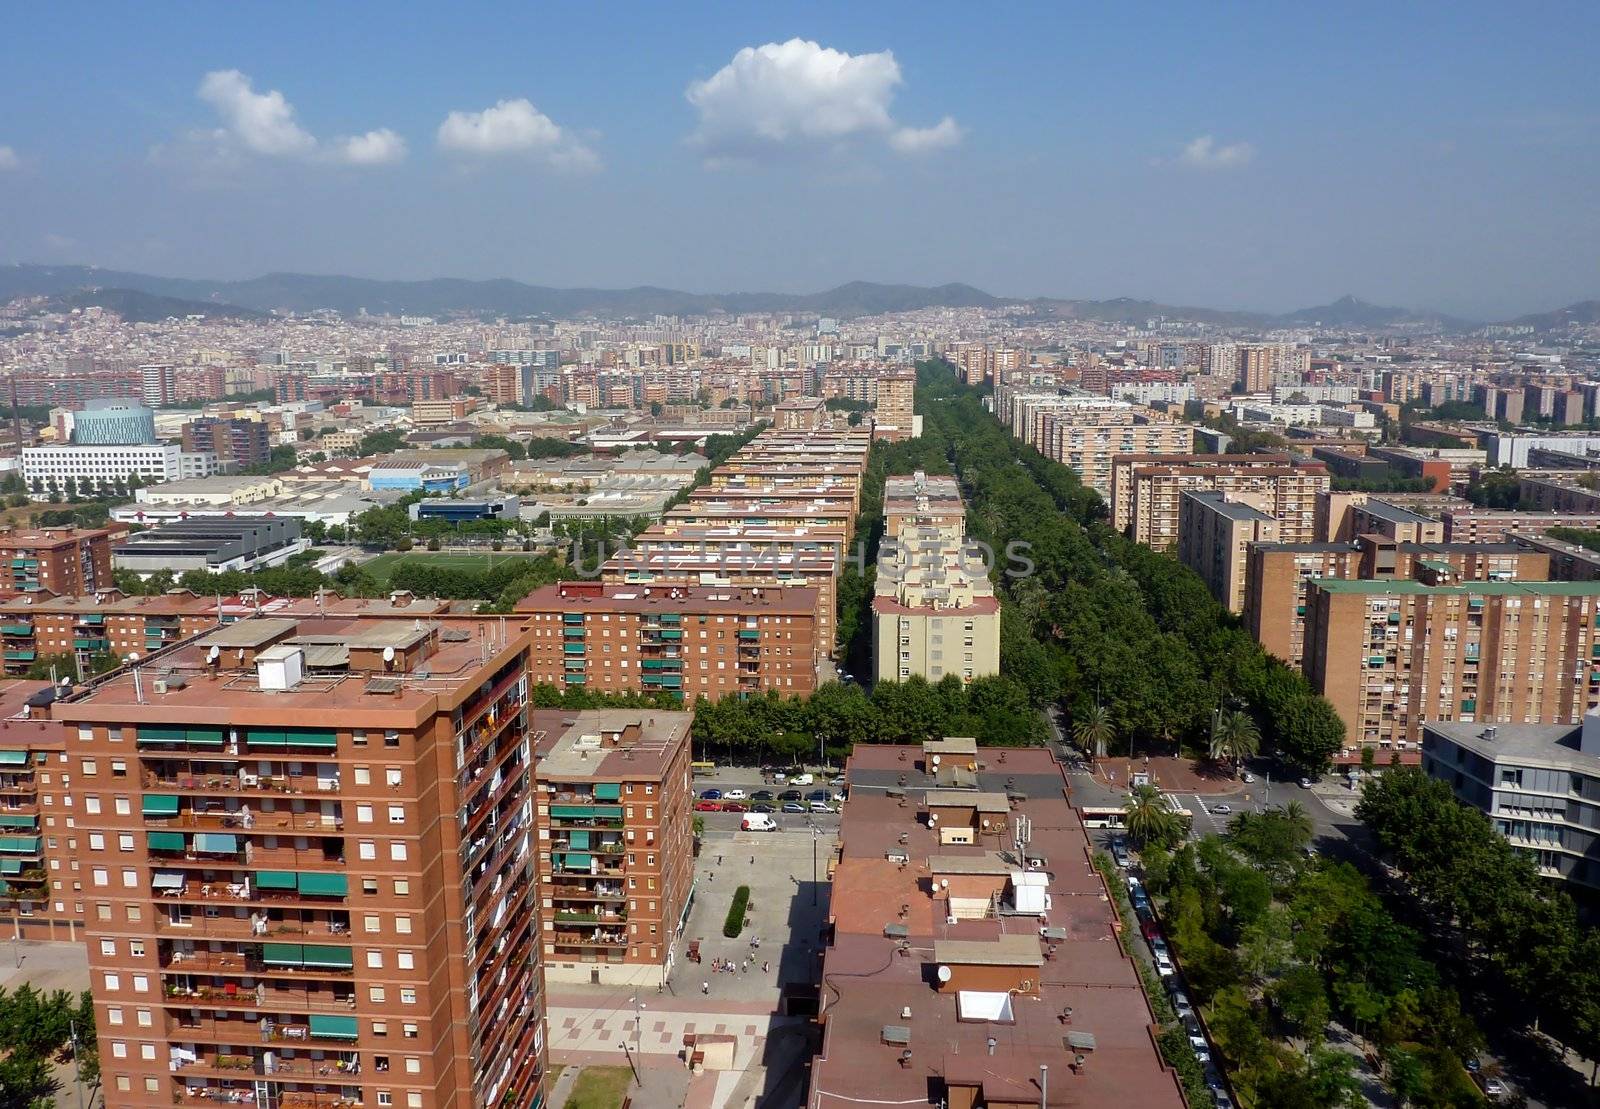 Aerial view of red buildings and streets in Barcelona, Spain